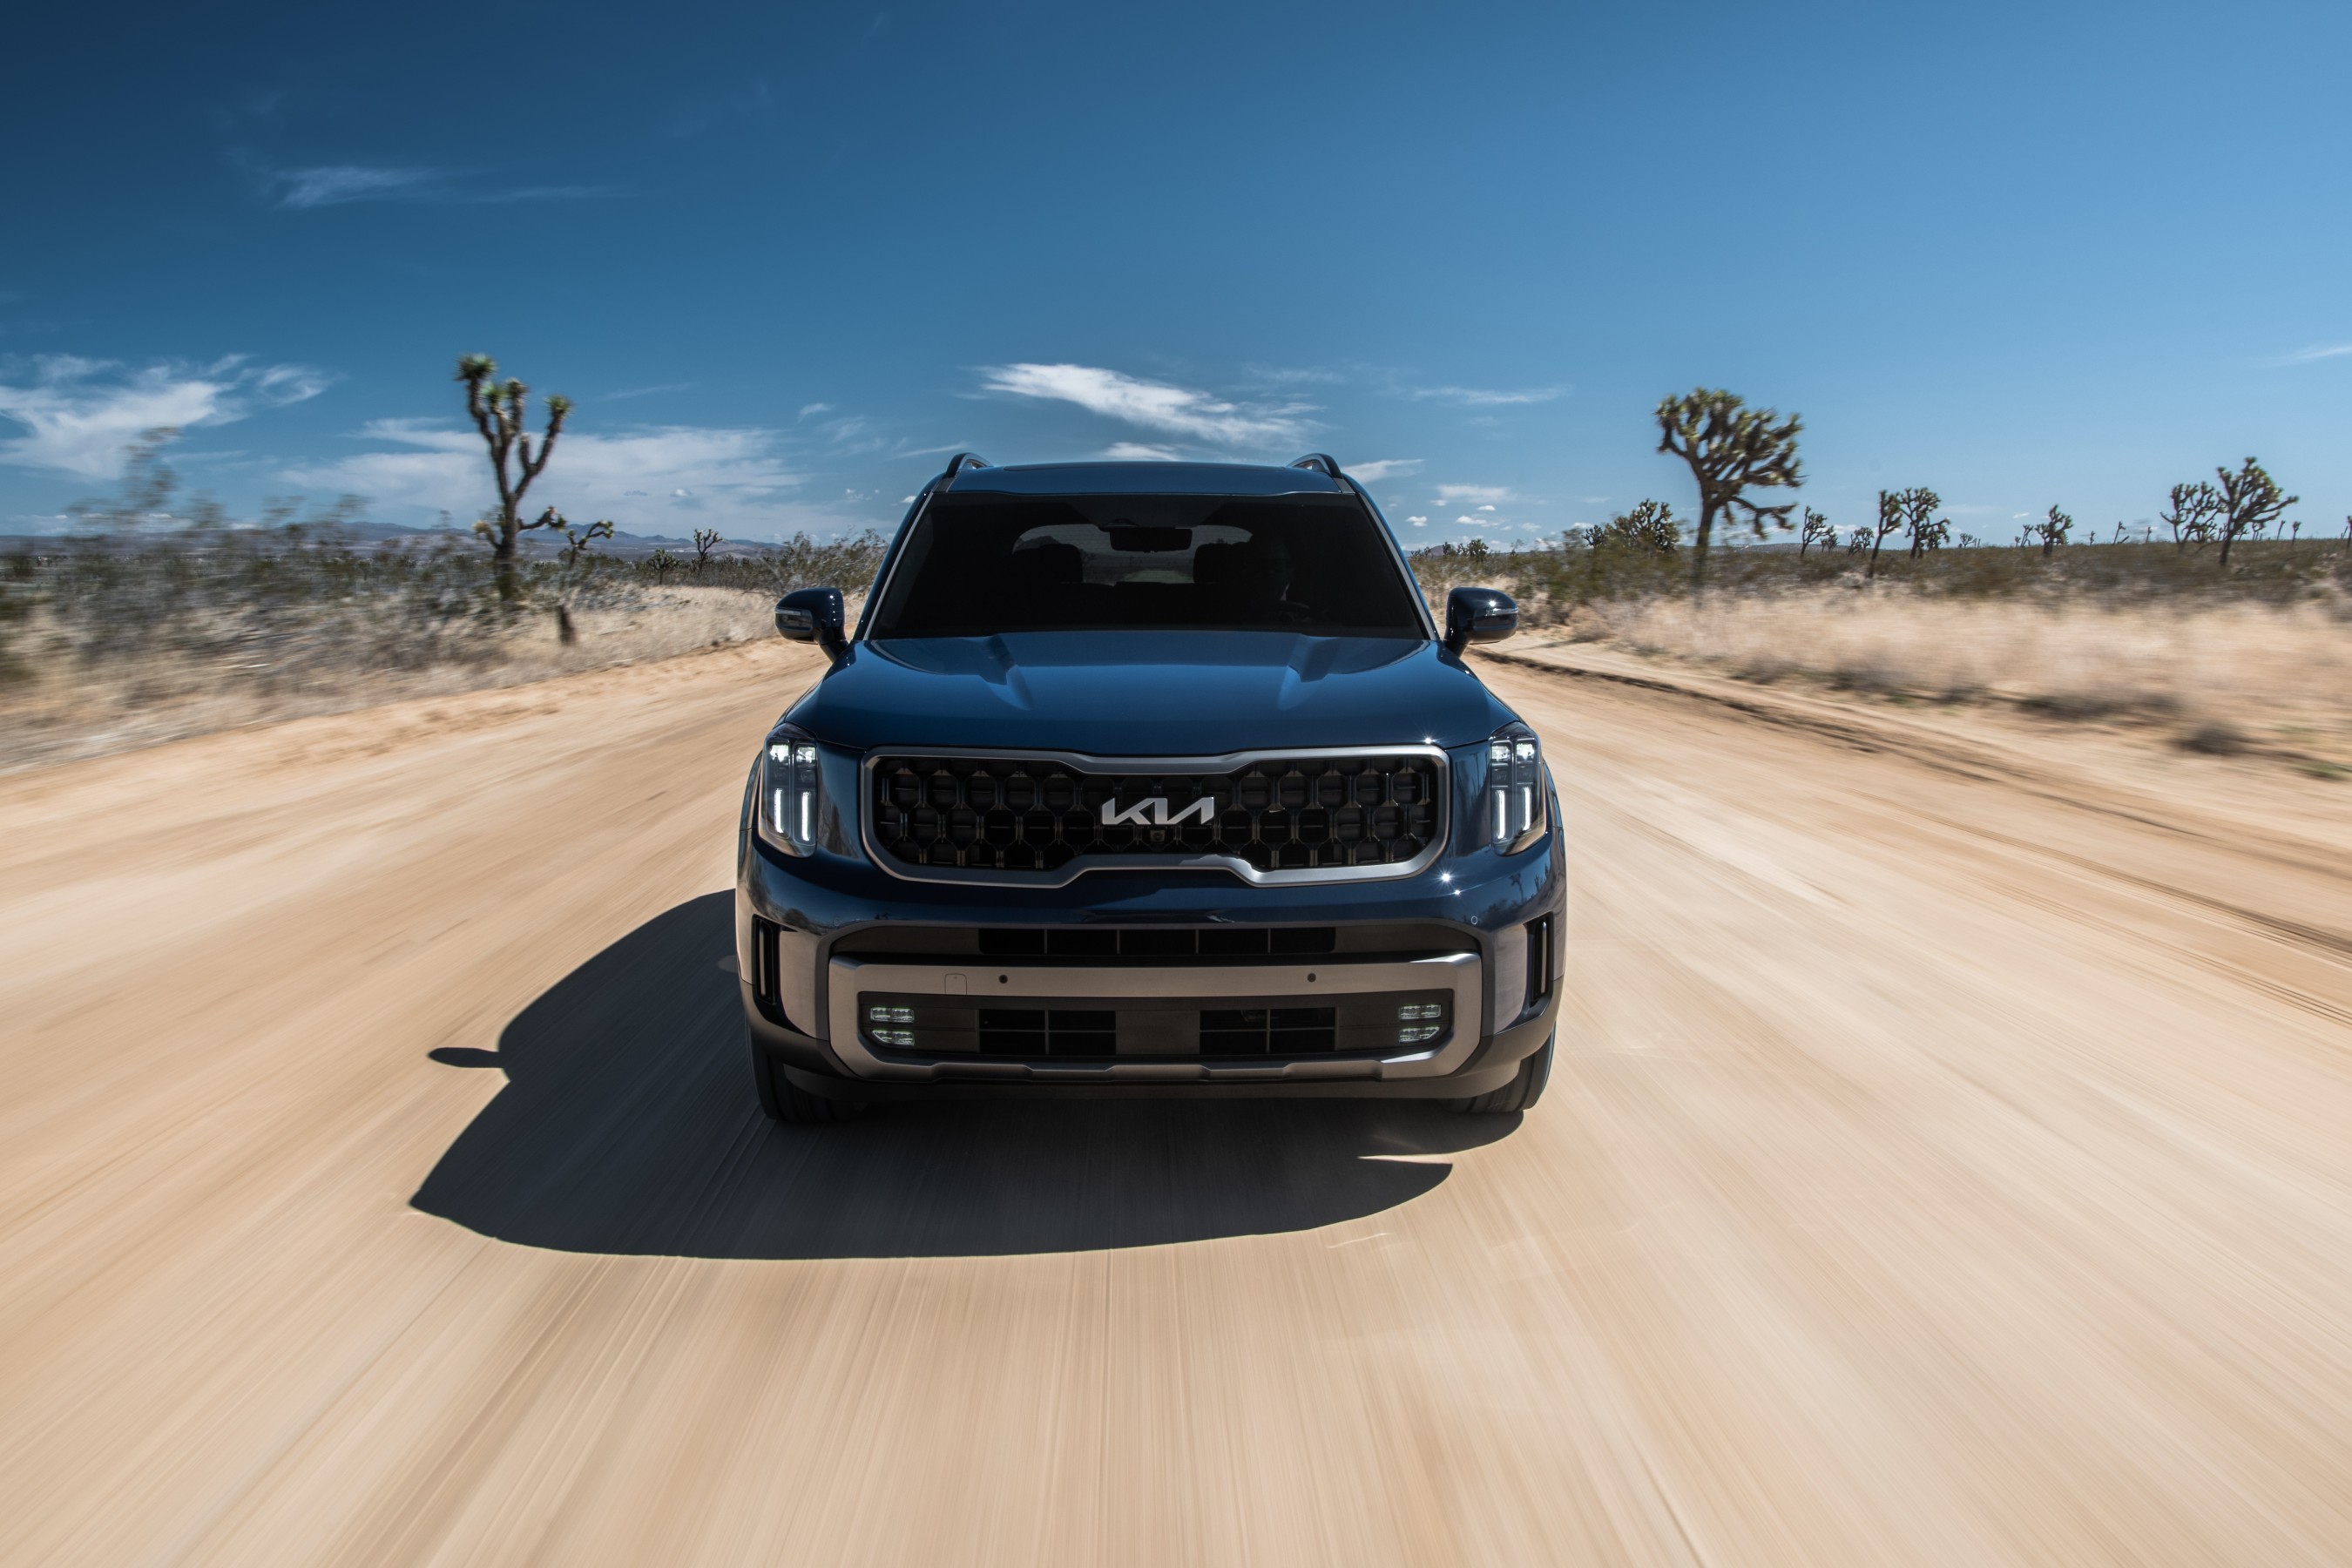 The new 2023 Kia Telluride arrives at New York International Auto Show with new styling, more capability, and enhanced technology.